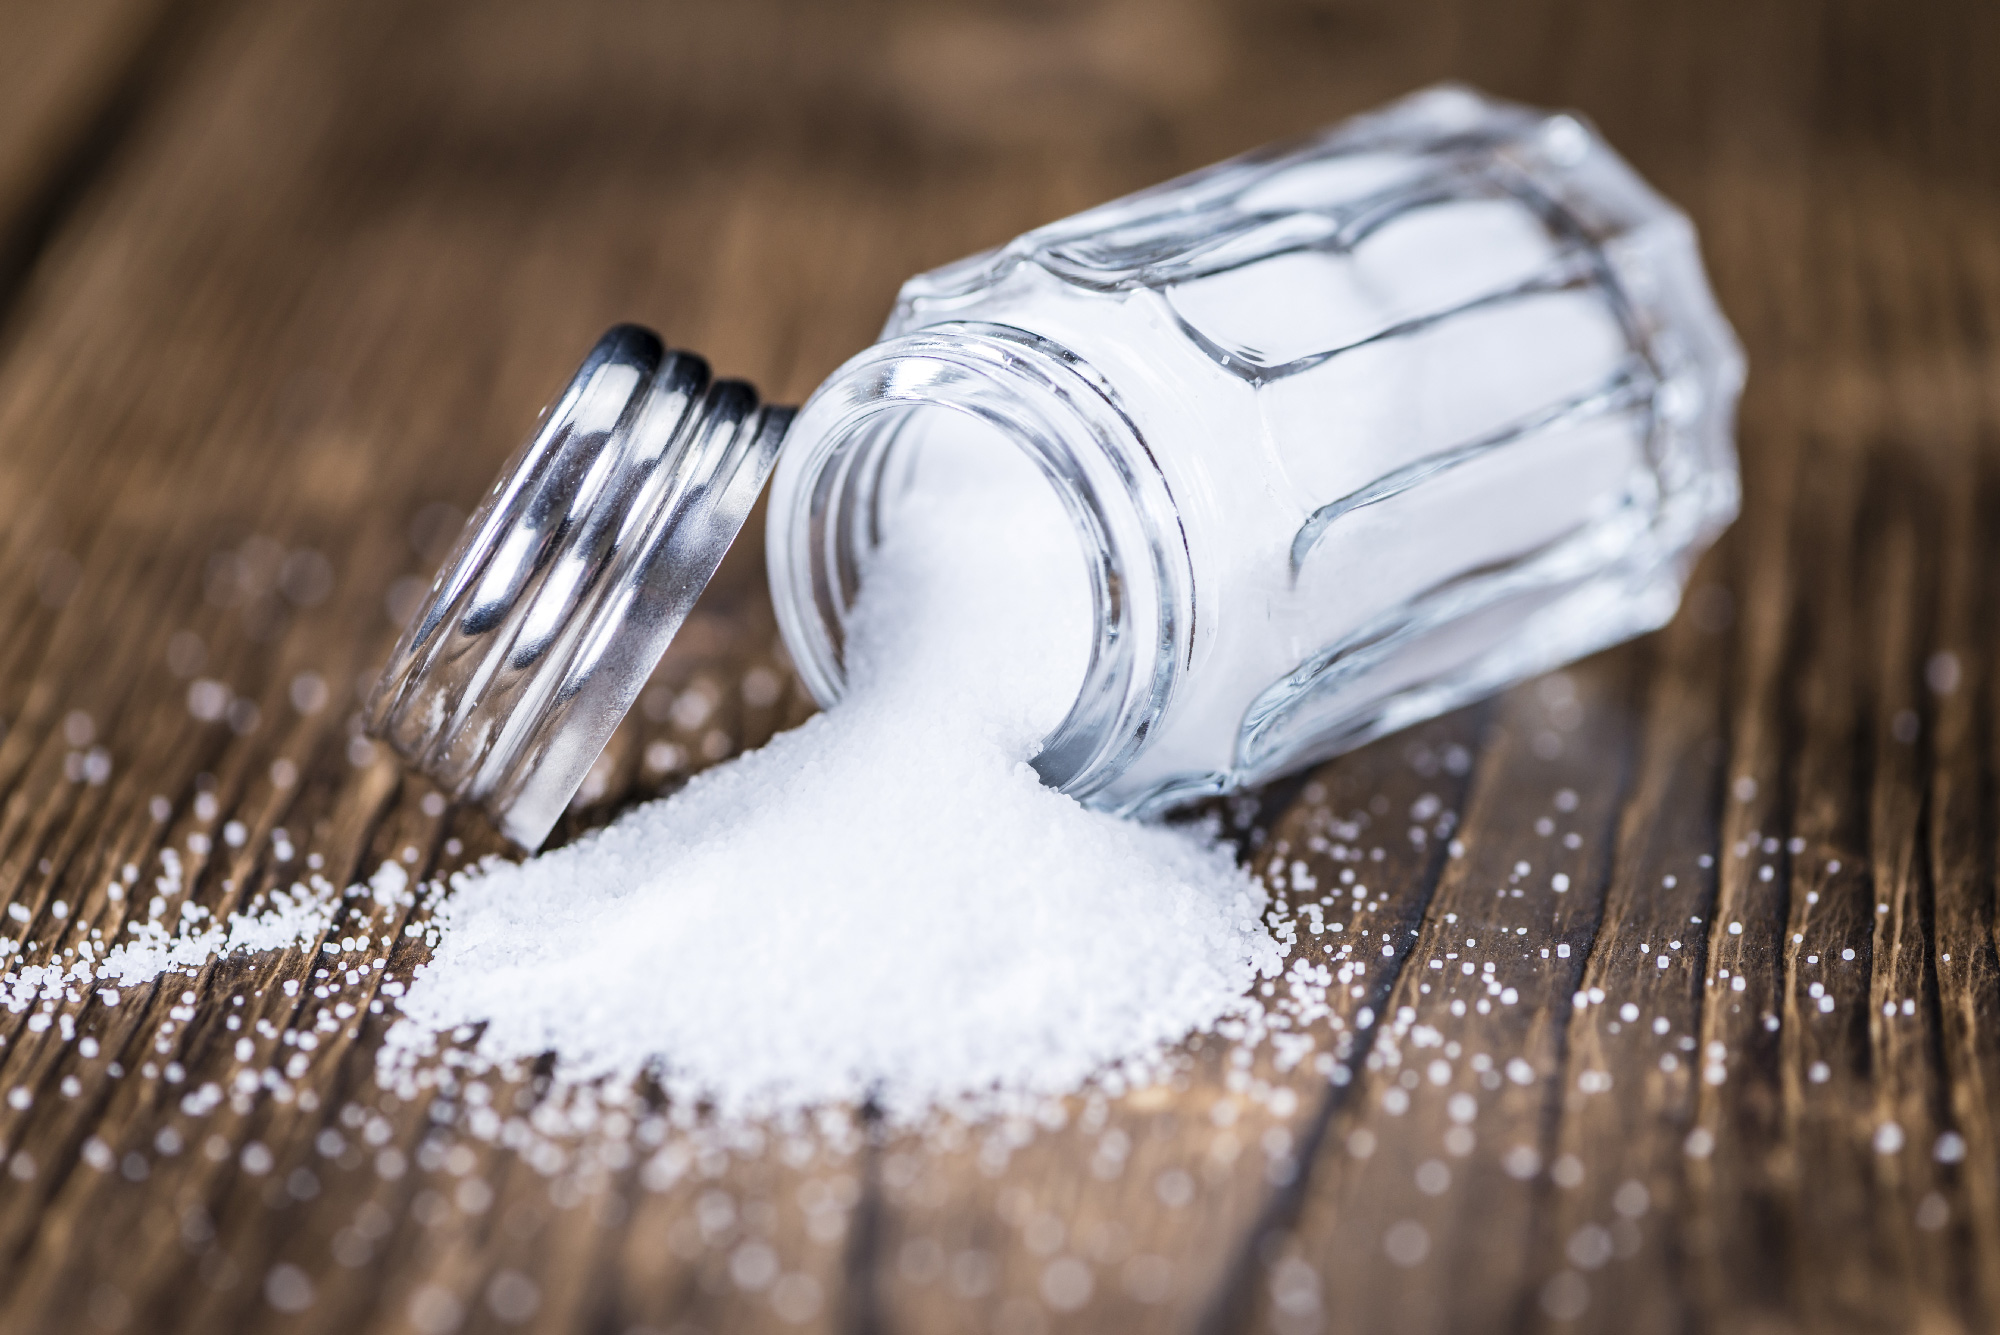 Will the new Sodium Guidance help reduce sodium in our foods?